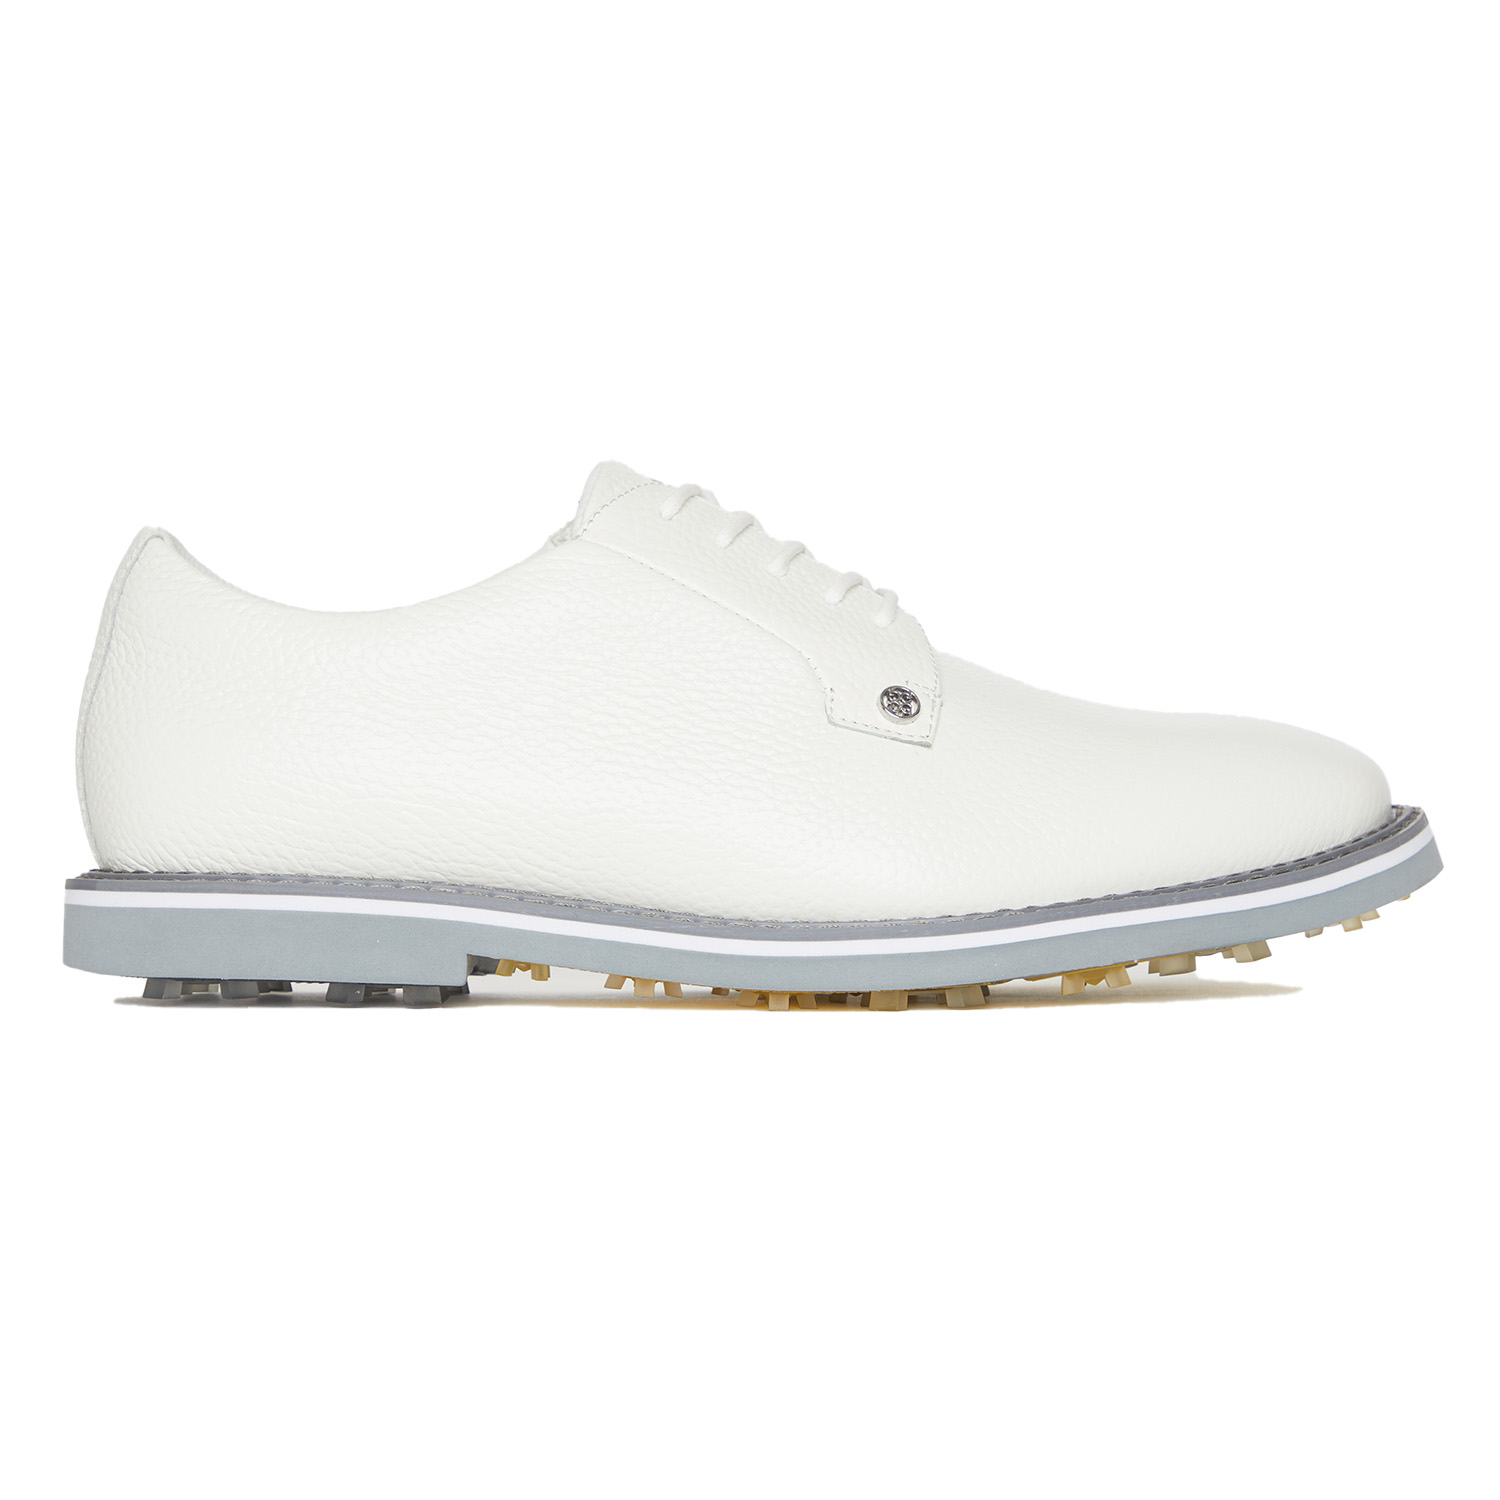 Image of G/FORE Gallivanter Golf Shoes